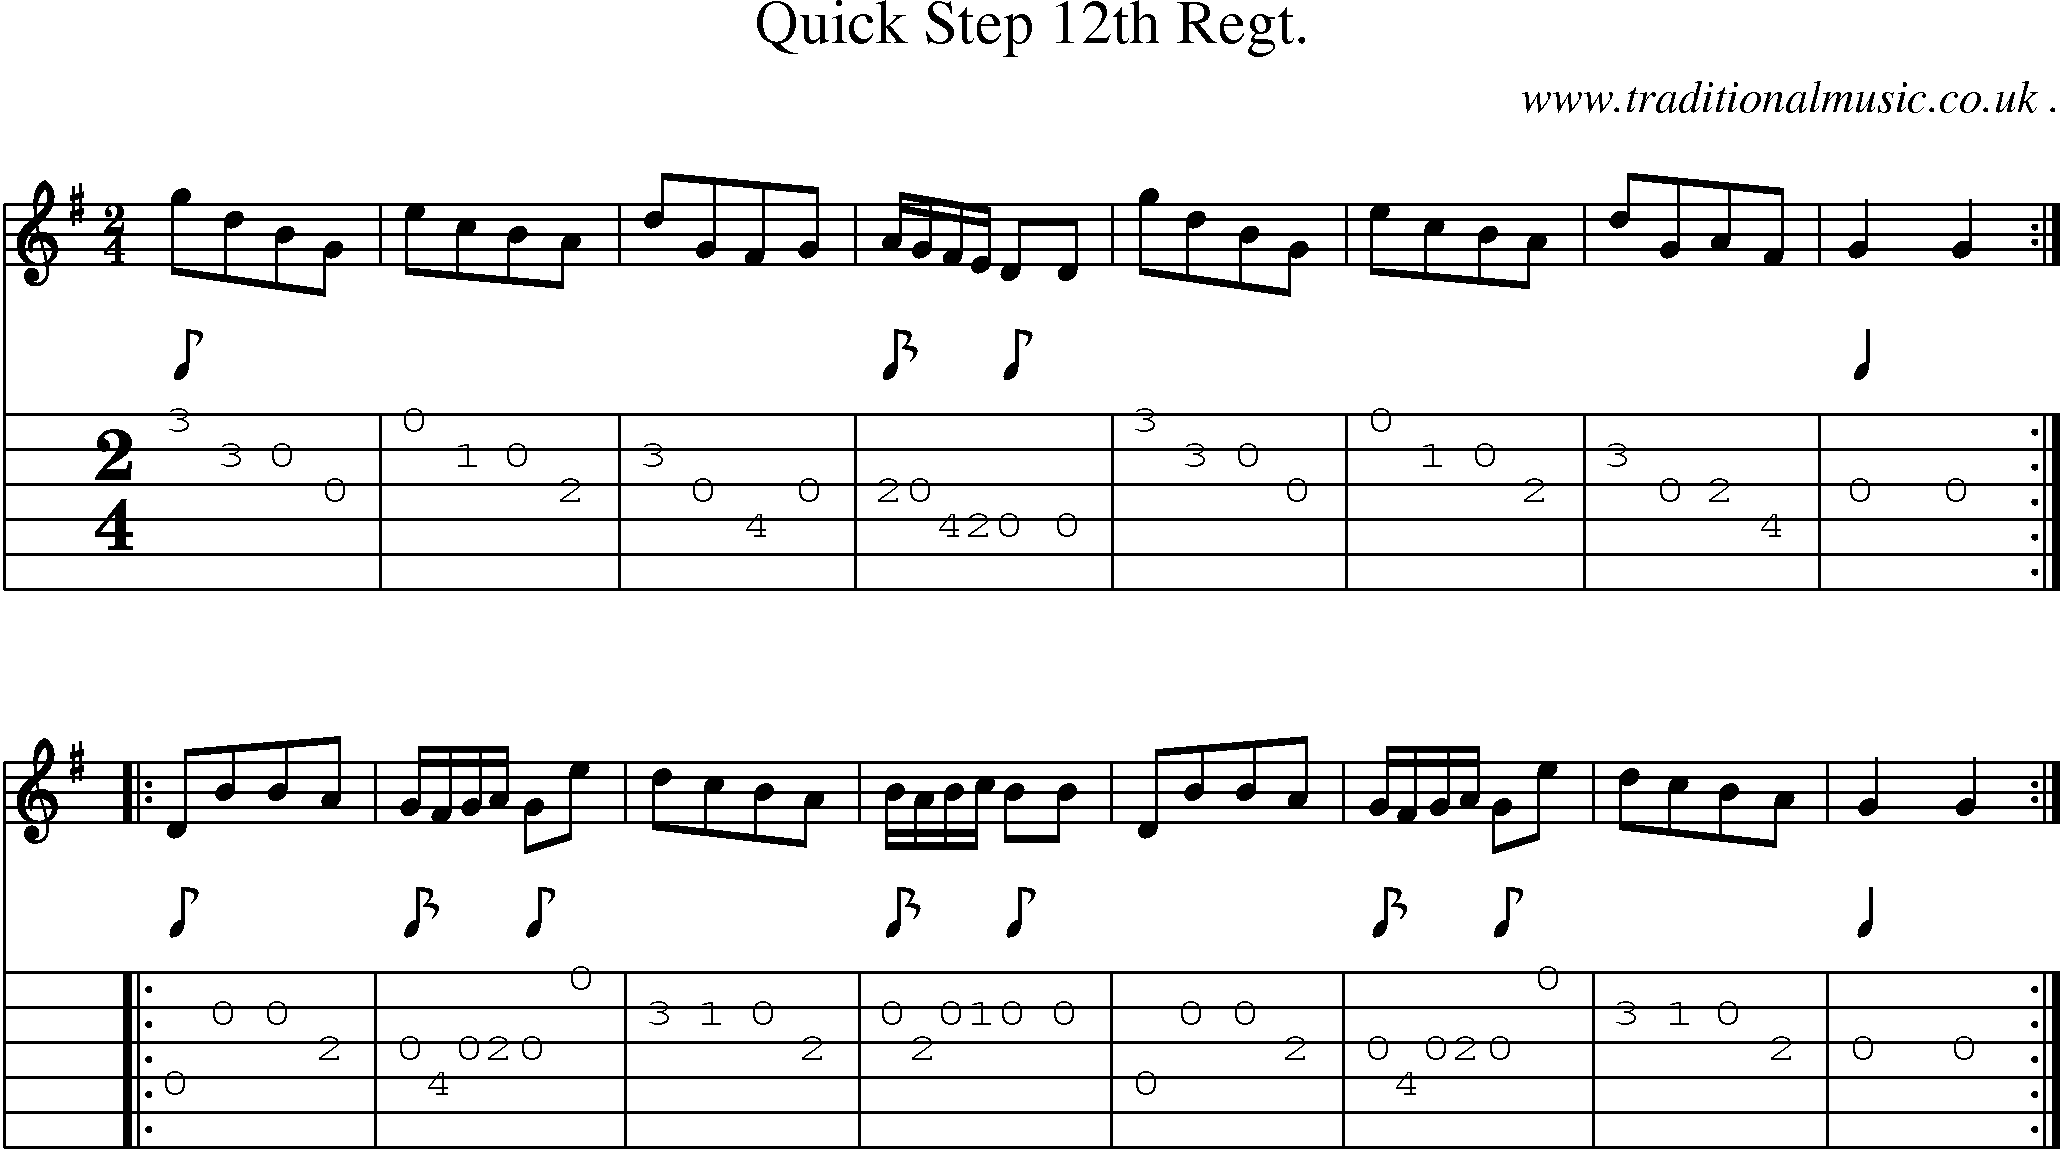 Sheet-music  score, Chords and Guitar Tabs for Quick Step 12th Regt